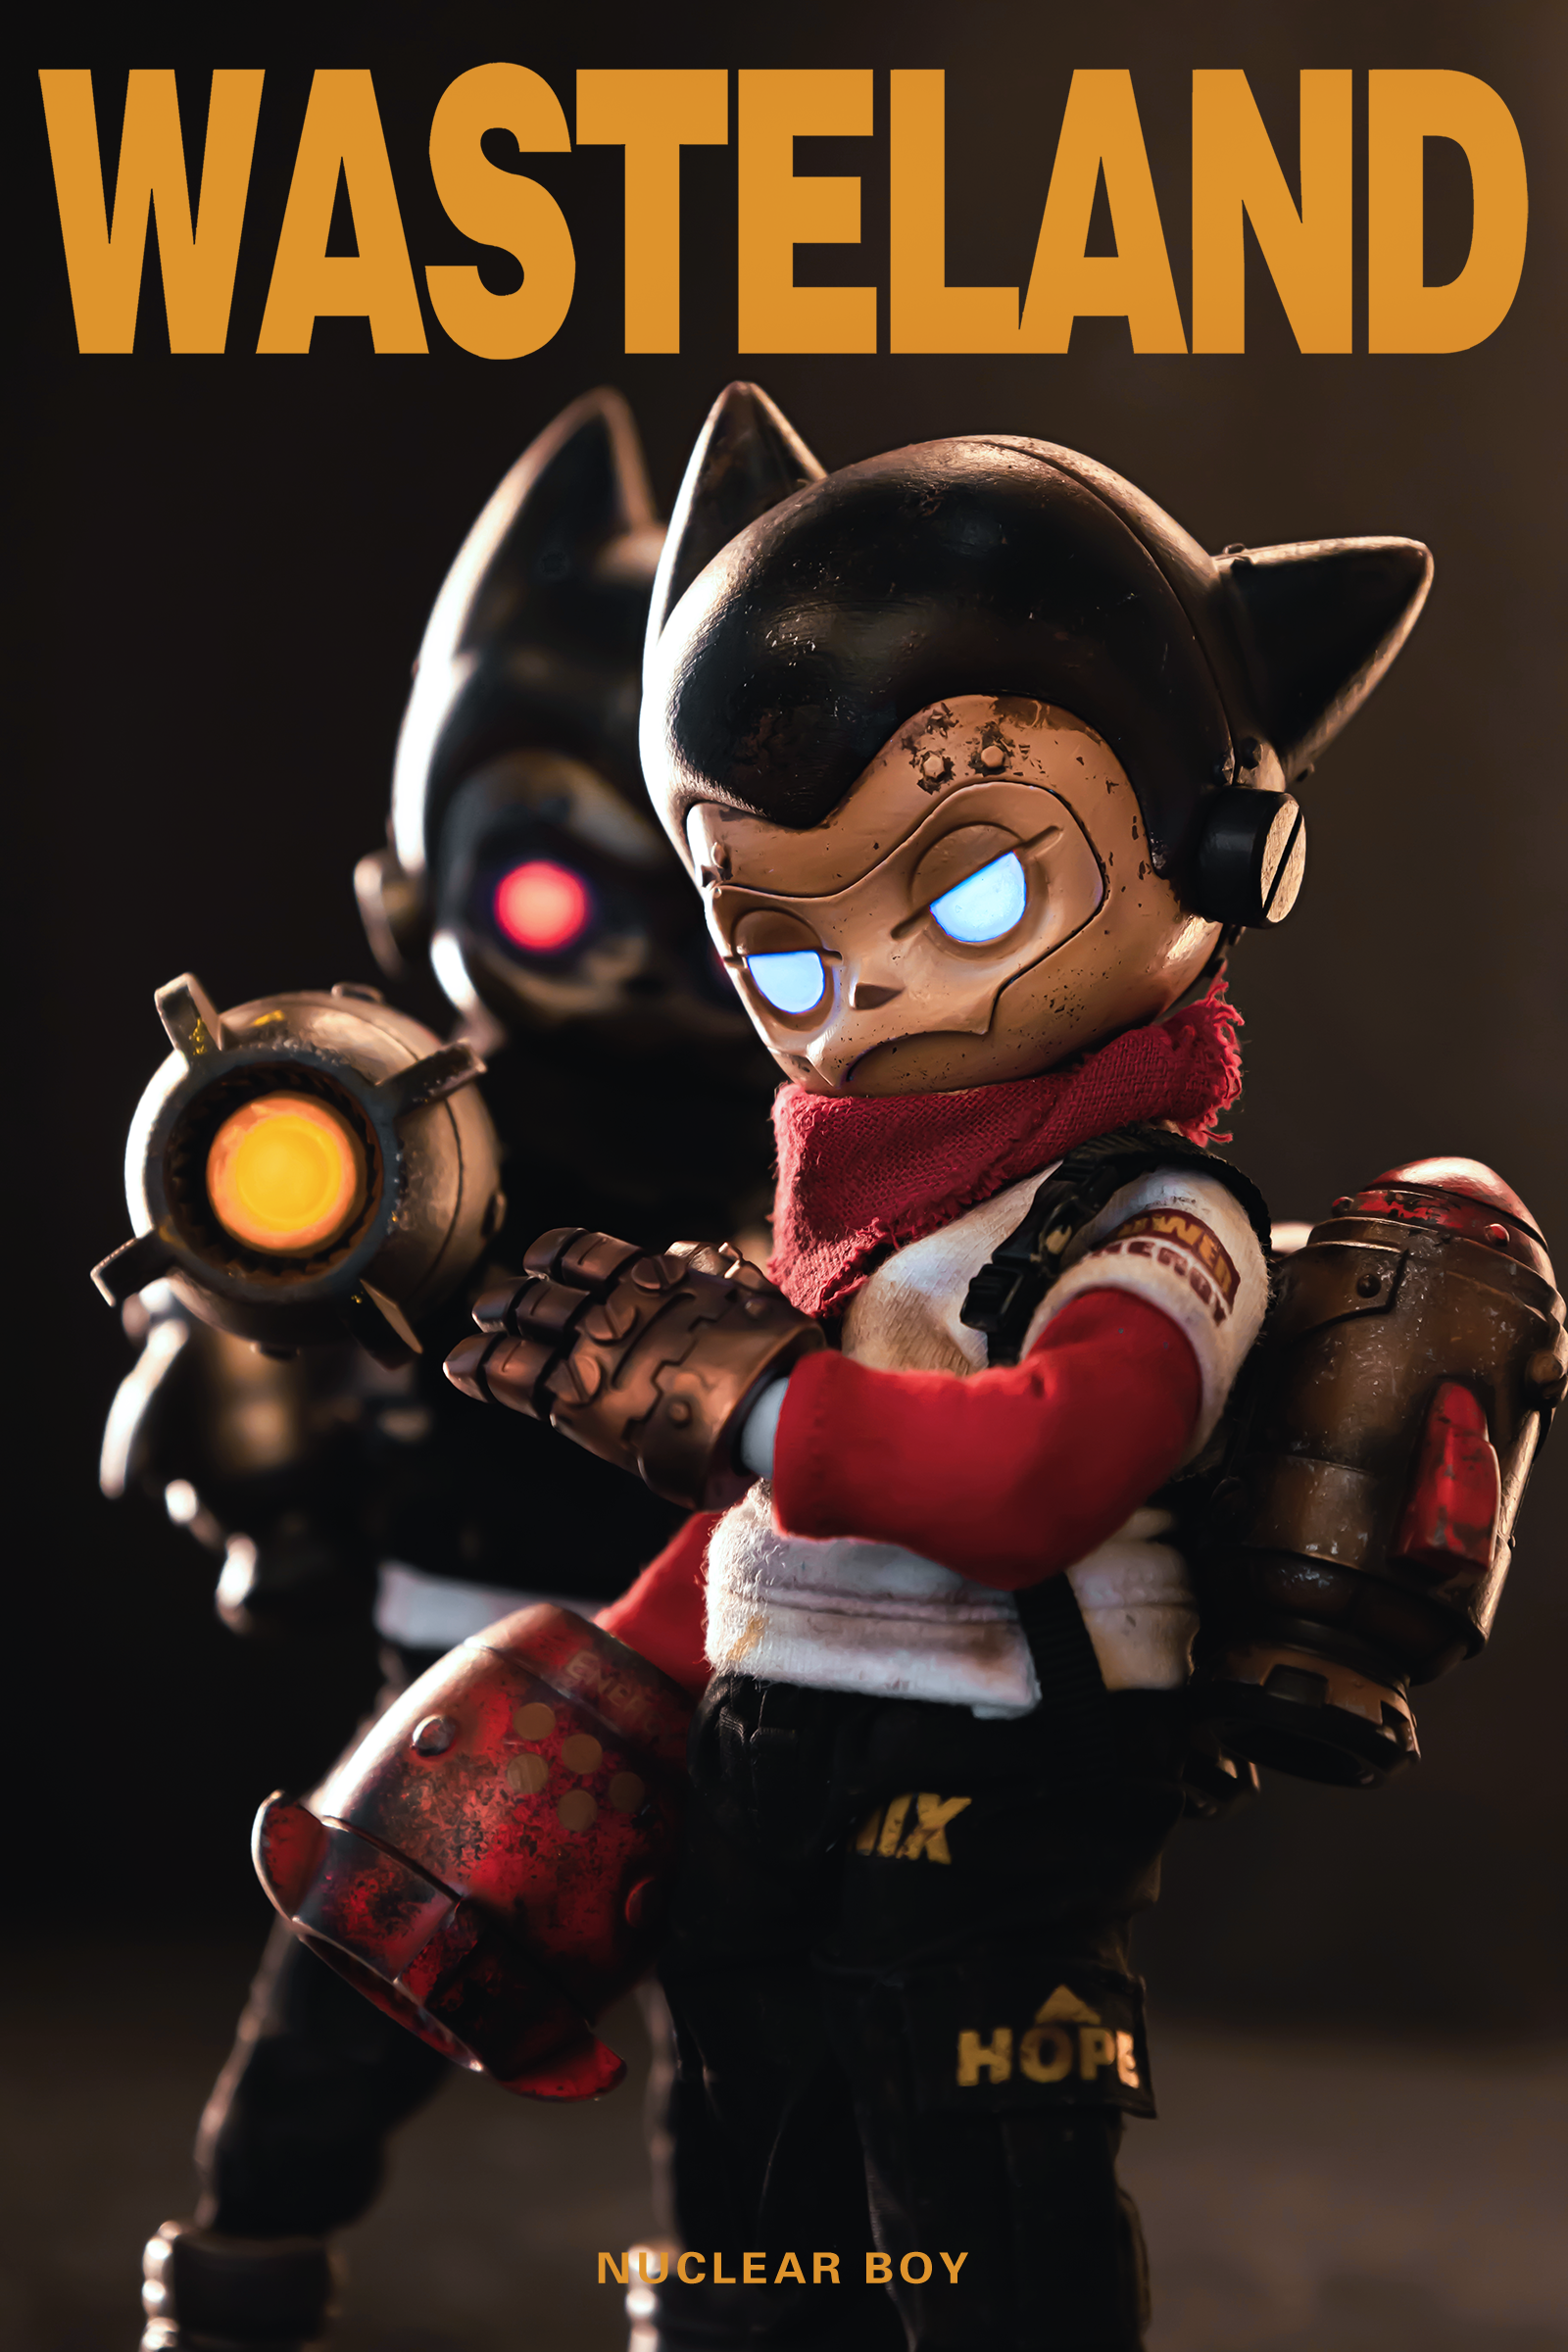 Toy figurine of Wasteland - Nuclear Boy with cat head, holding weapon, detailed accessories.